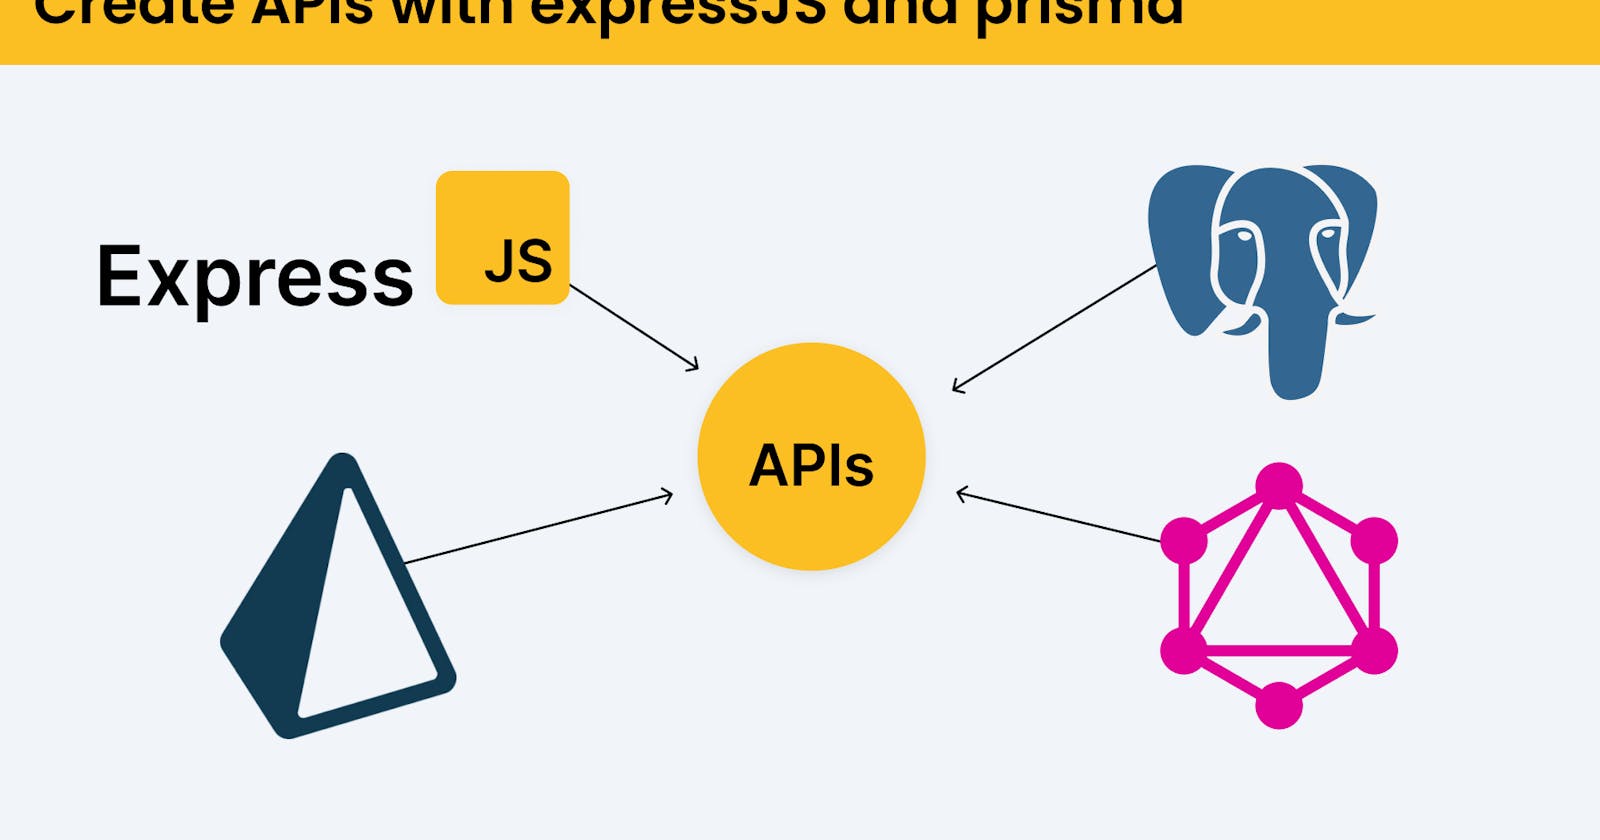 How to use Prisma with express, postgress, and Graphql?